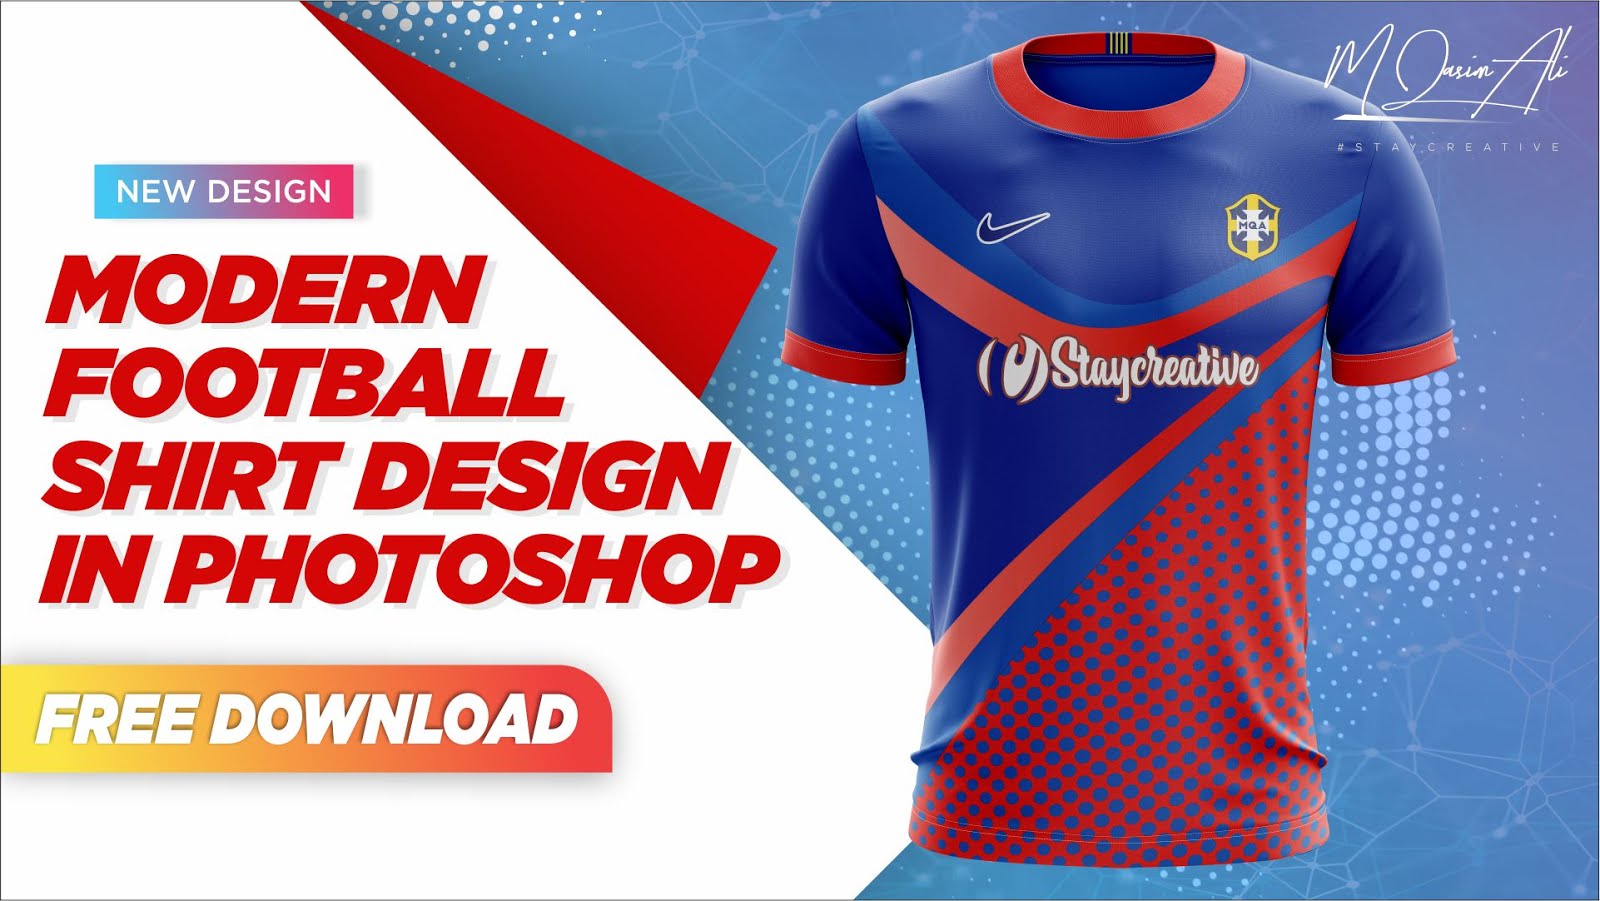 Download Modern Football Shirt Design In Photoshop Free Yellow Images Mockup Download By M Qasim Ali M Qasim Ali Sports Templates For Photoshop